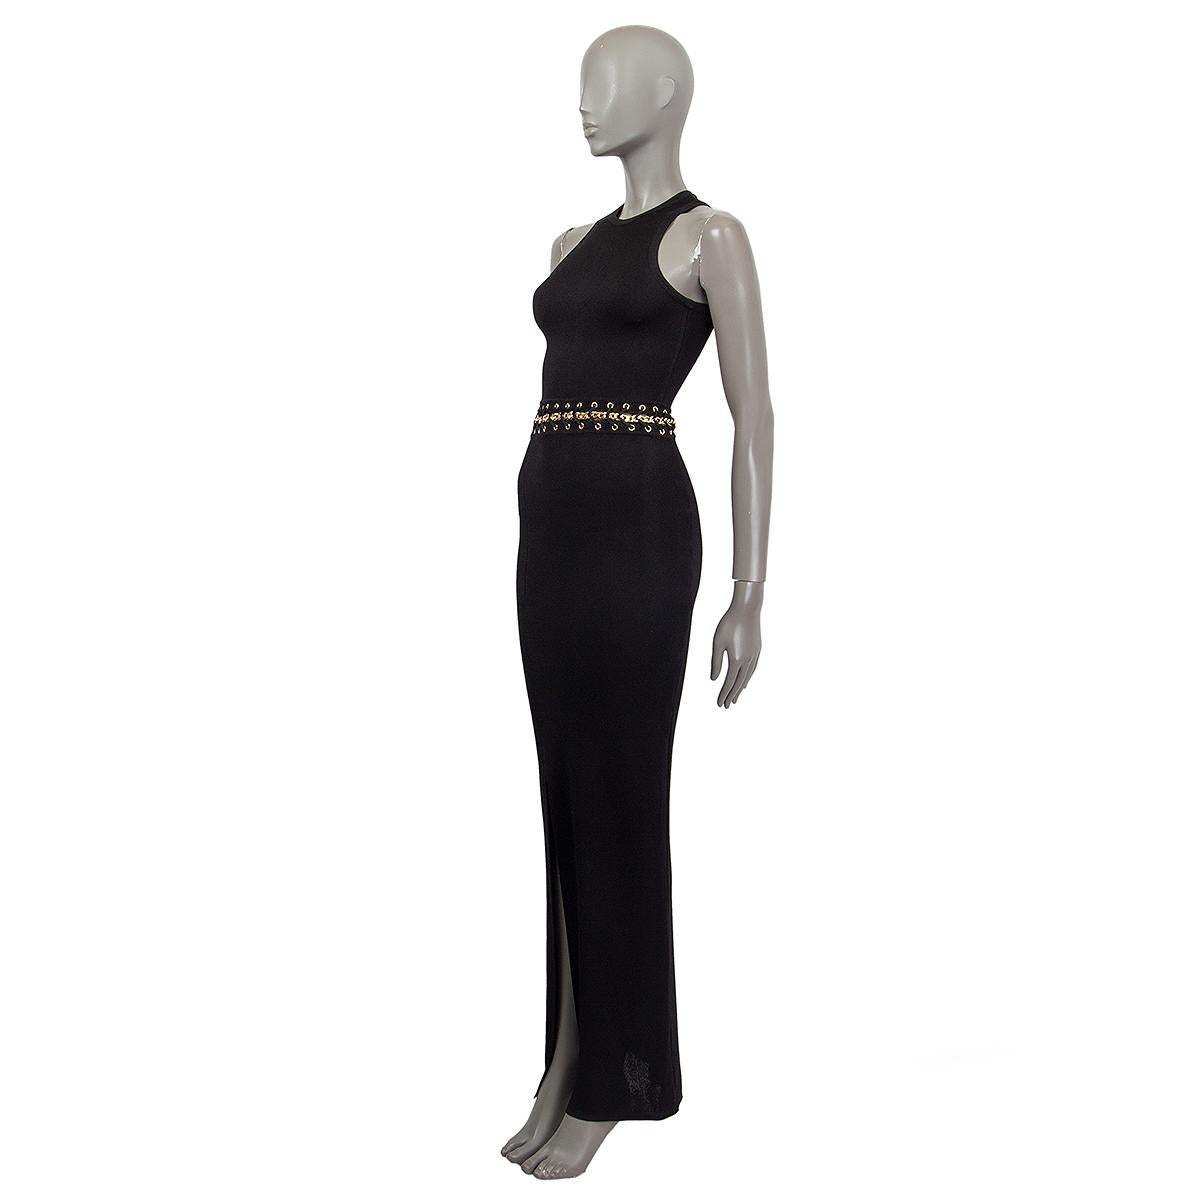 100% authentic Balmain sleeveless stretch knit maxi dress in black viscose (90%), polyamide (9%) and elastane (1%) Has a gold-tone chain and lace-up detail on the waist, high slit on the front. Opens with  zipper in the back. Unlined. Has been worn